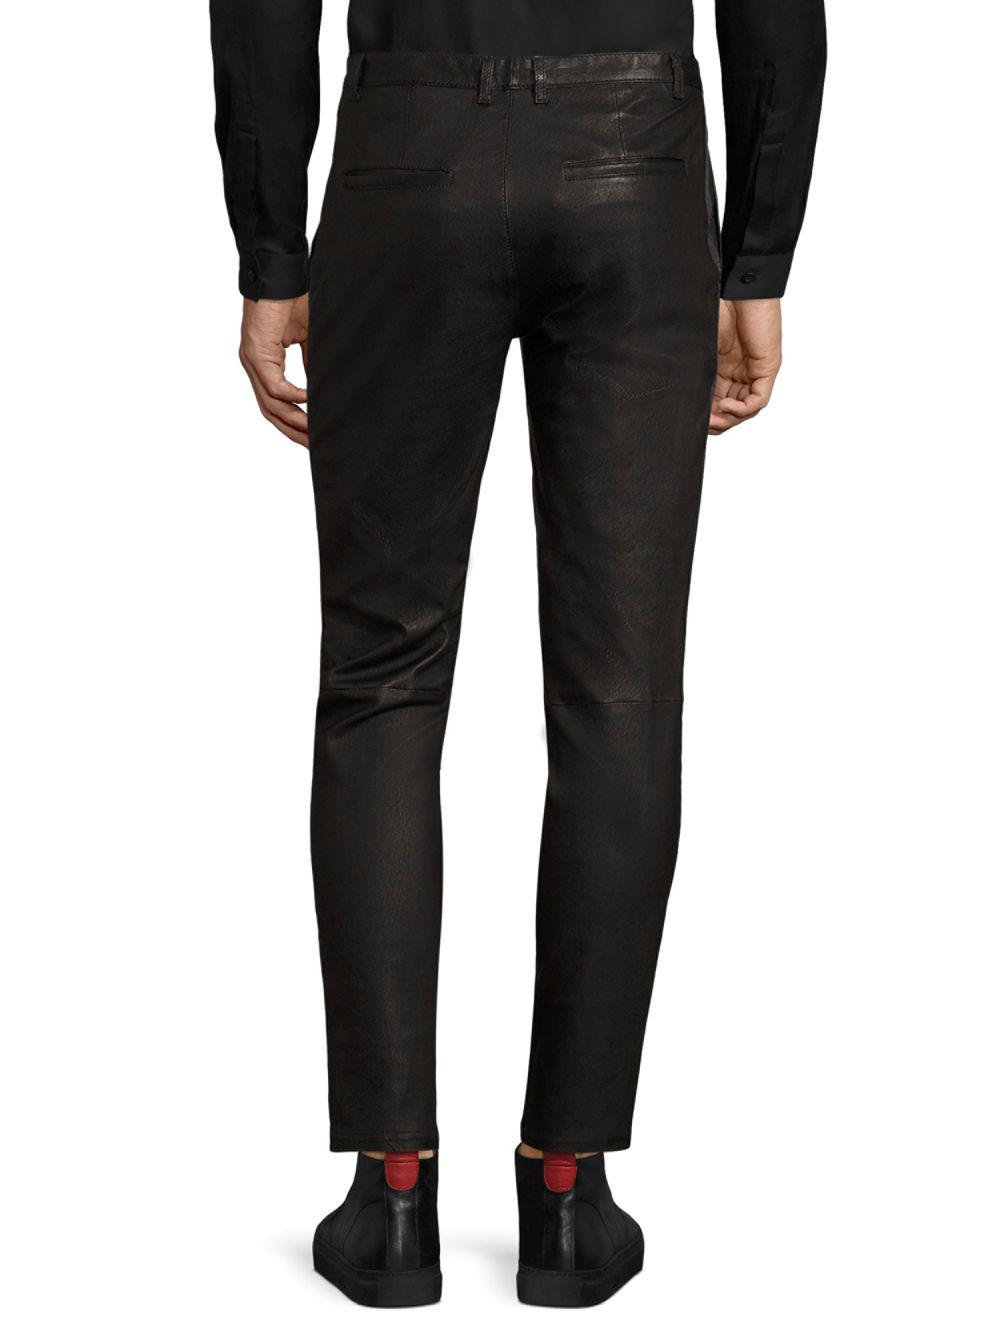 The Kooples Leather Pants in Black for Men - Lyst